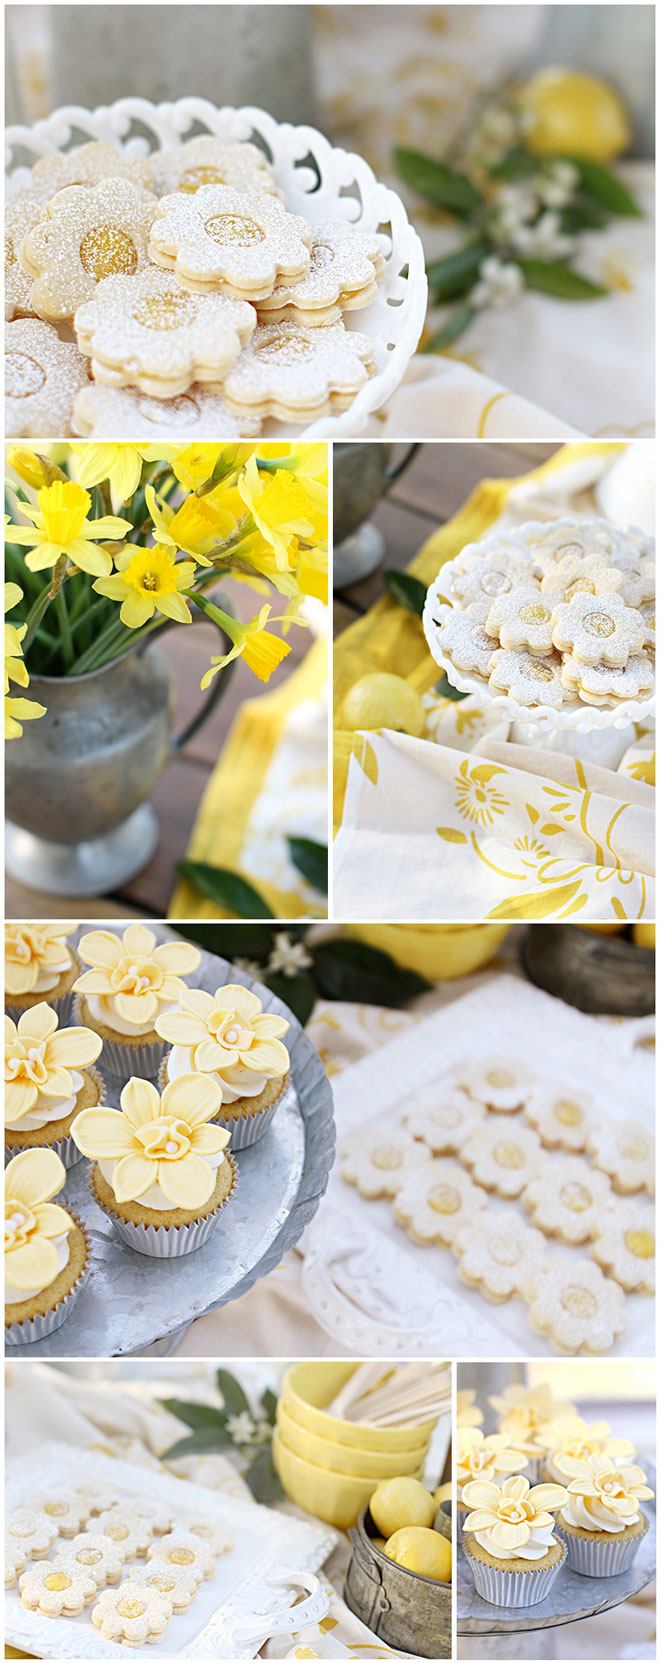 Lemon Dessert Table Feature on Love The Day